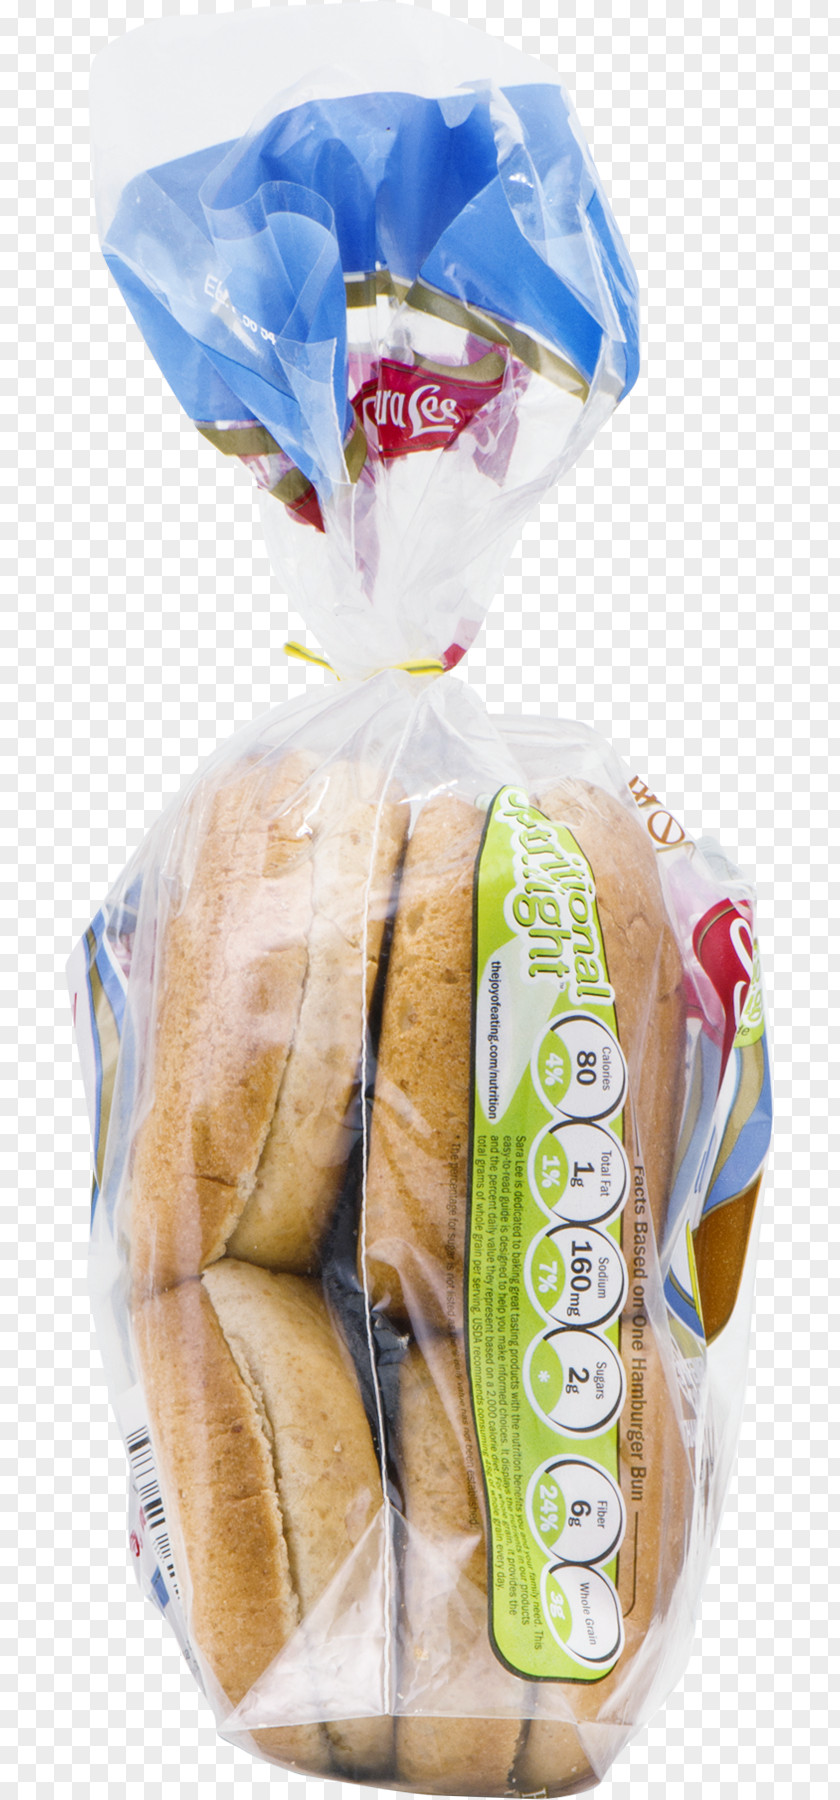 Whole Wheat Bread Junk Food Snack PNG